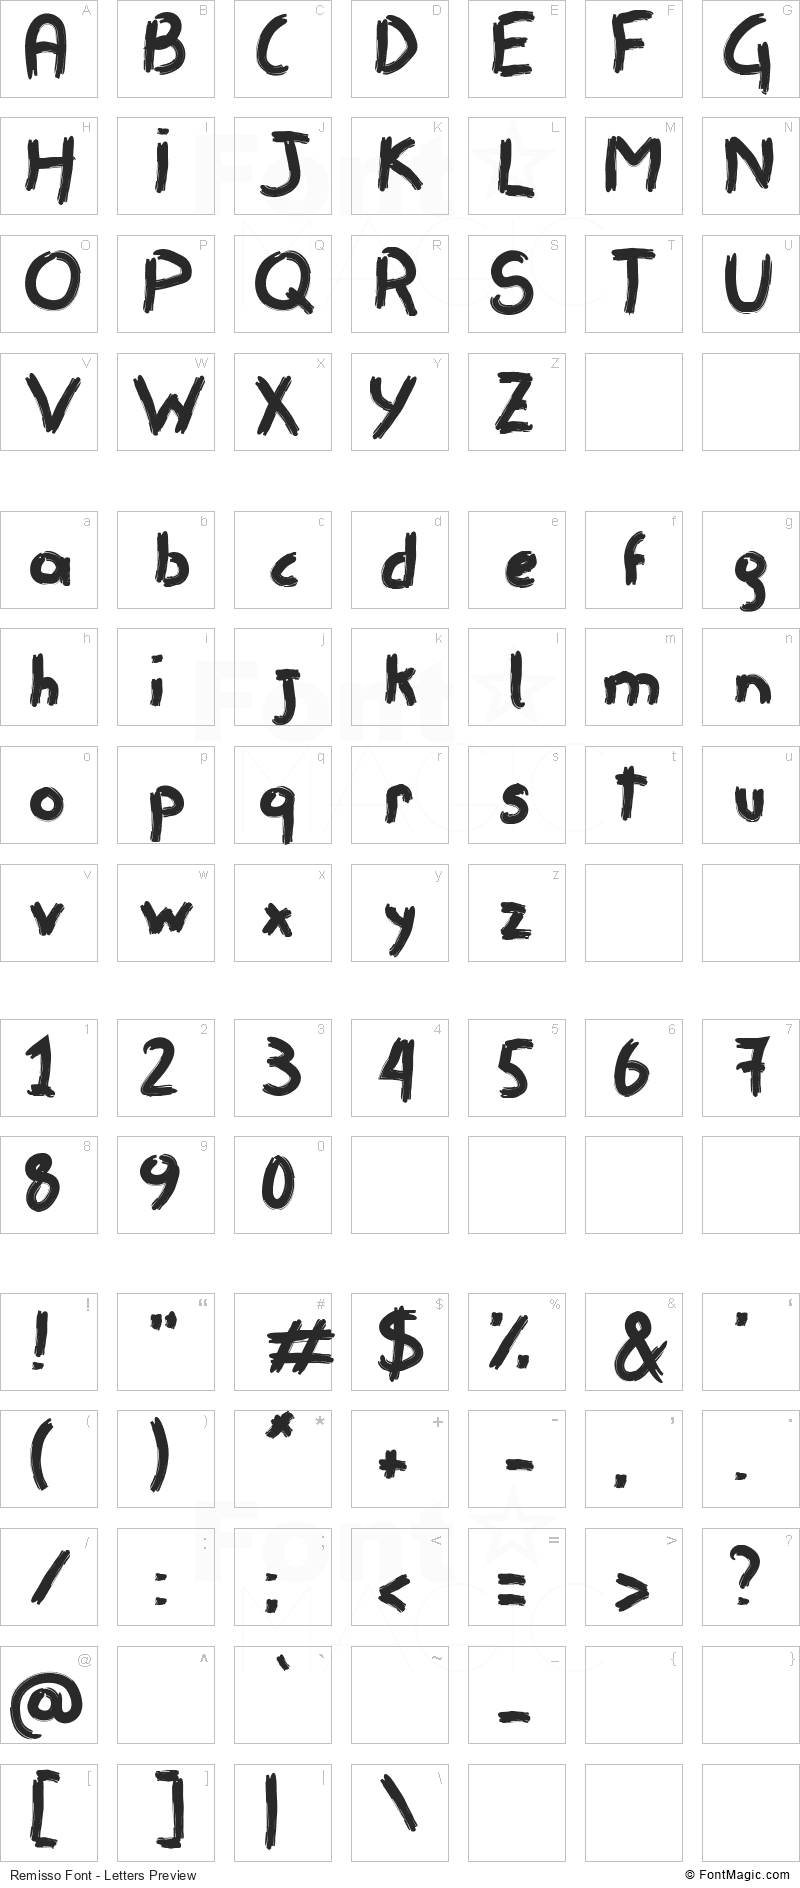 Remisso Font - All Latters Preview Chart